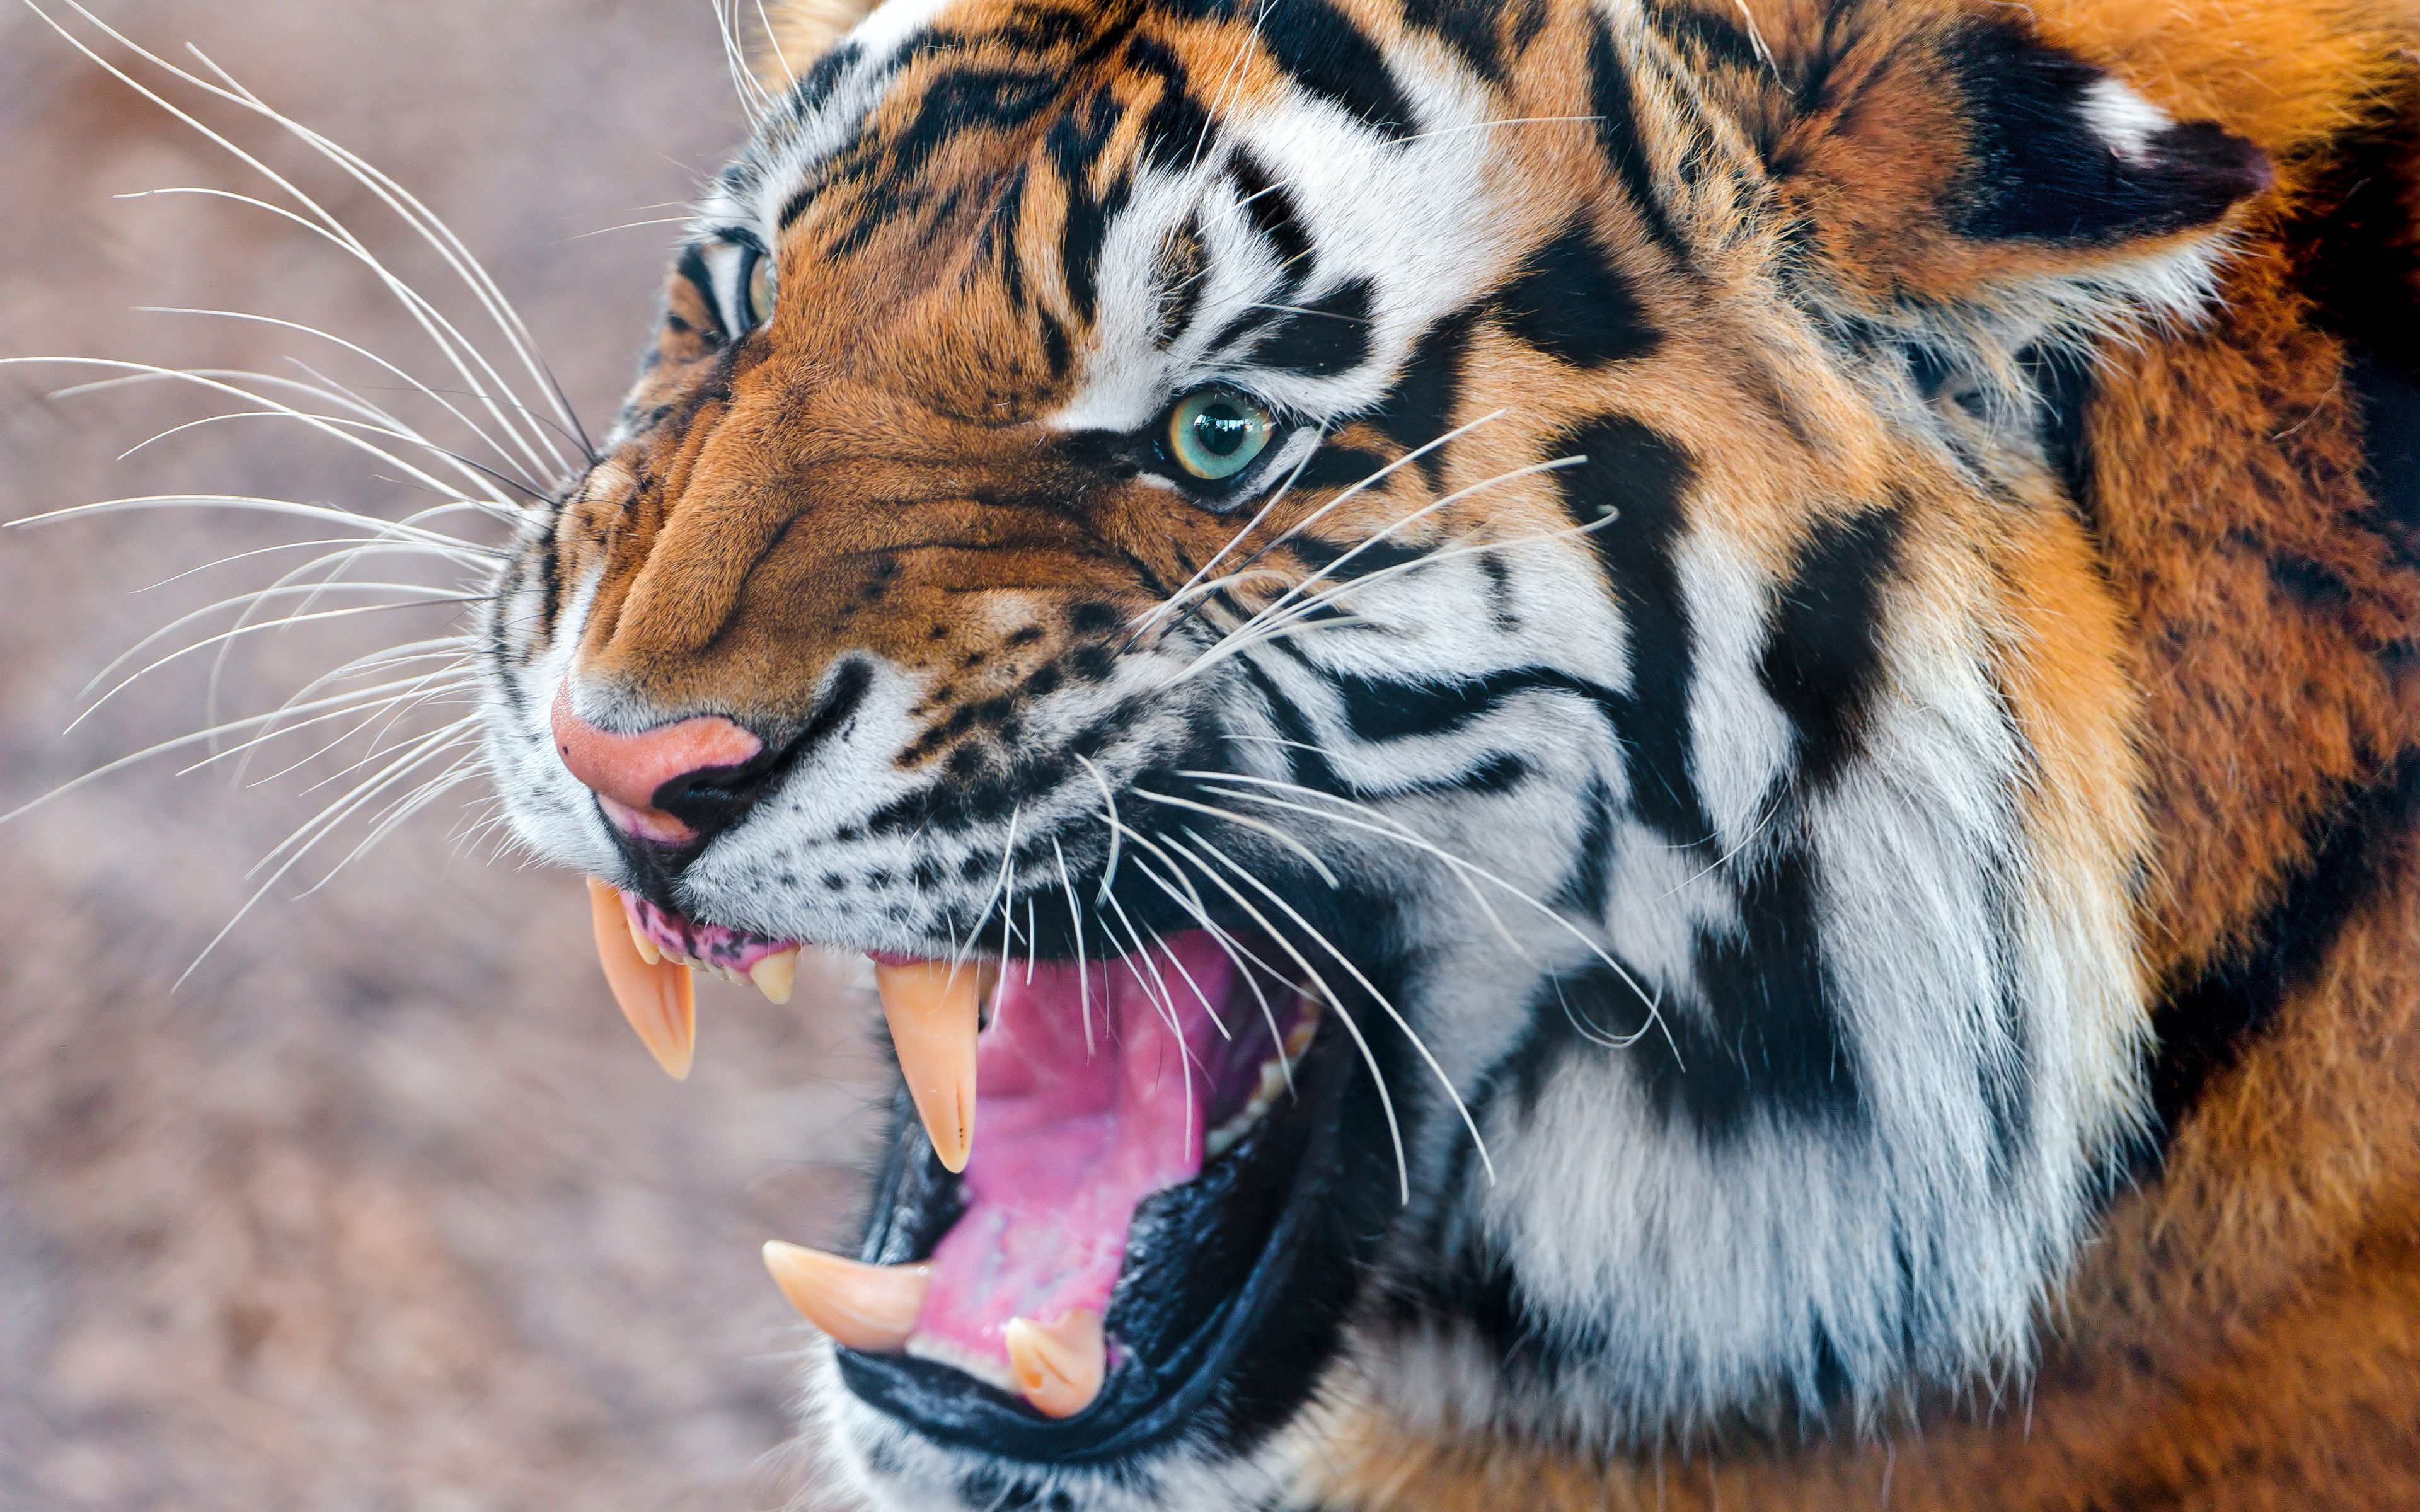 grin, tiger, animals, aggression, muzzle, anger cellphone